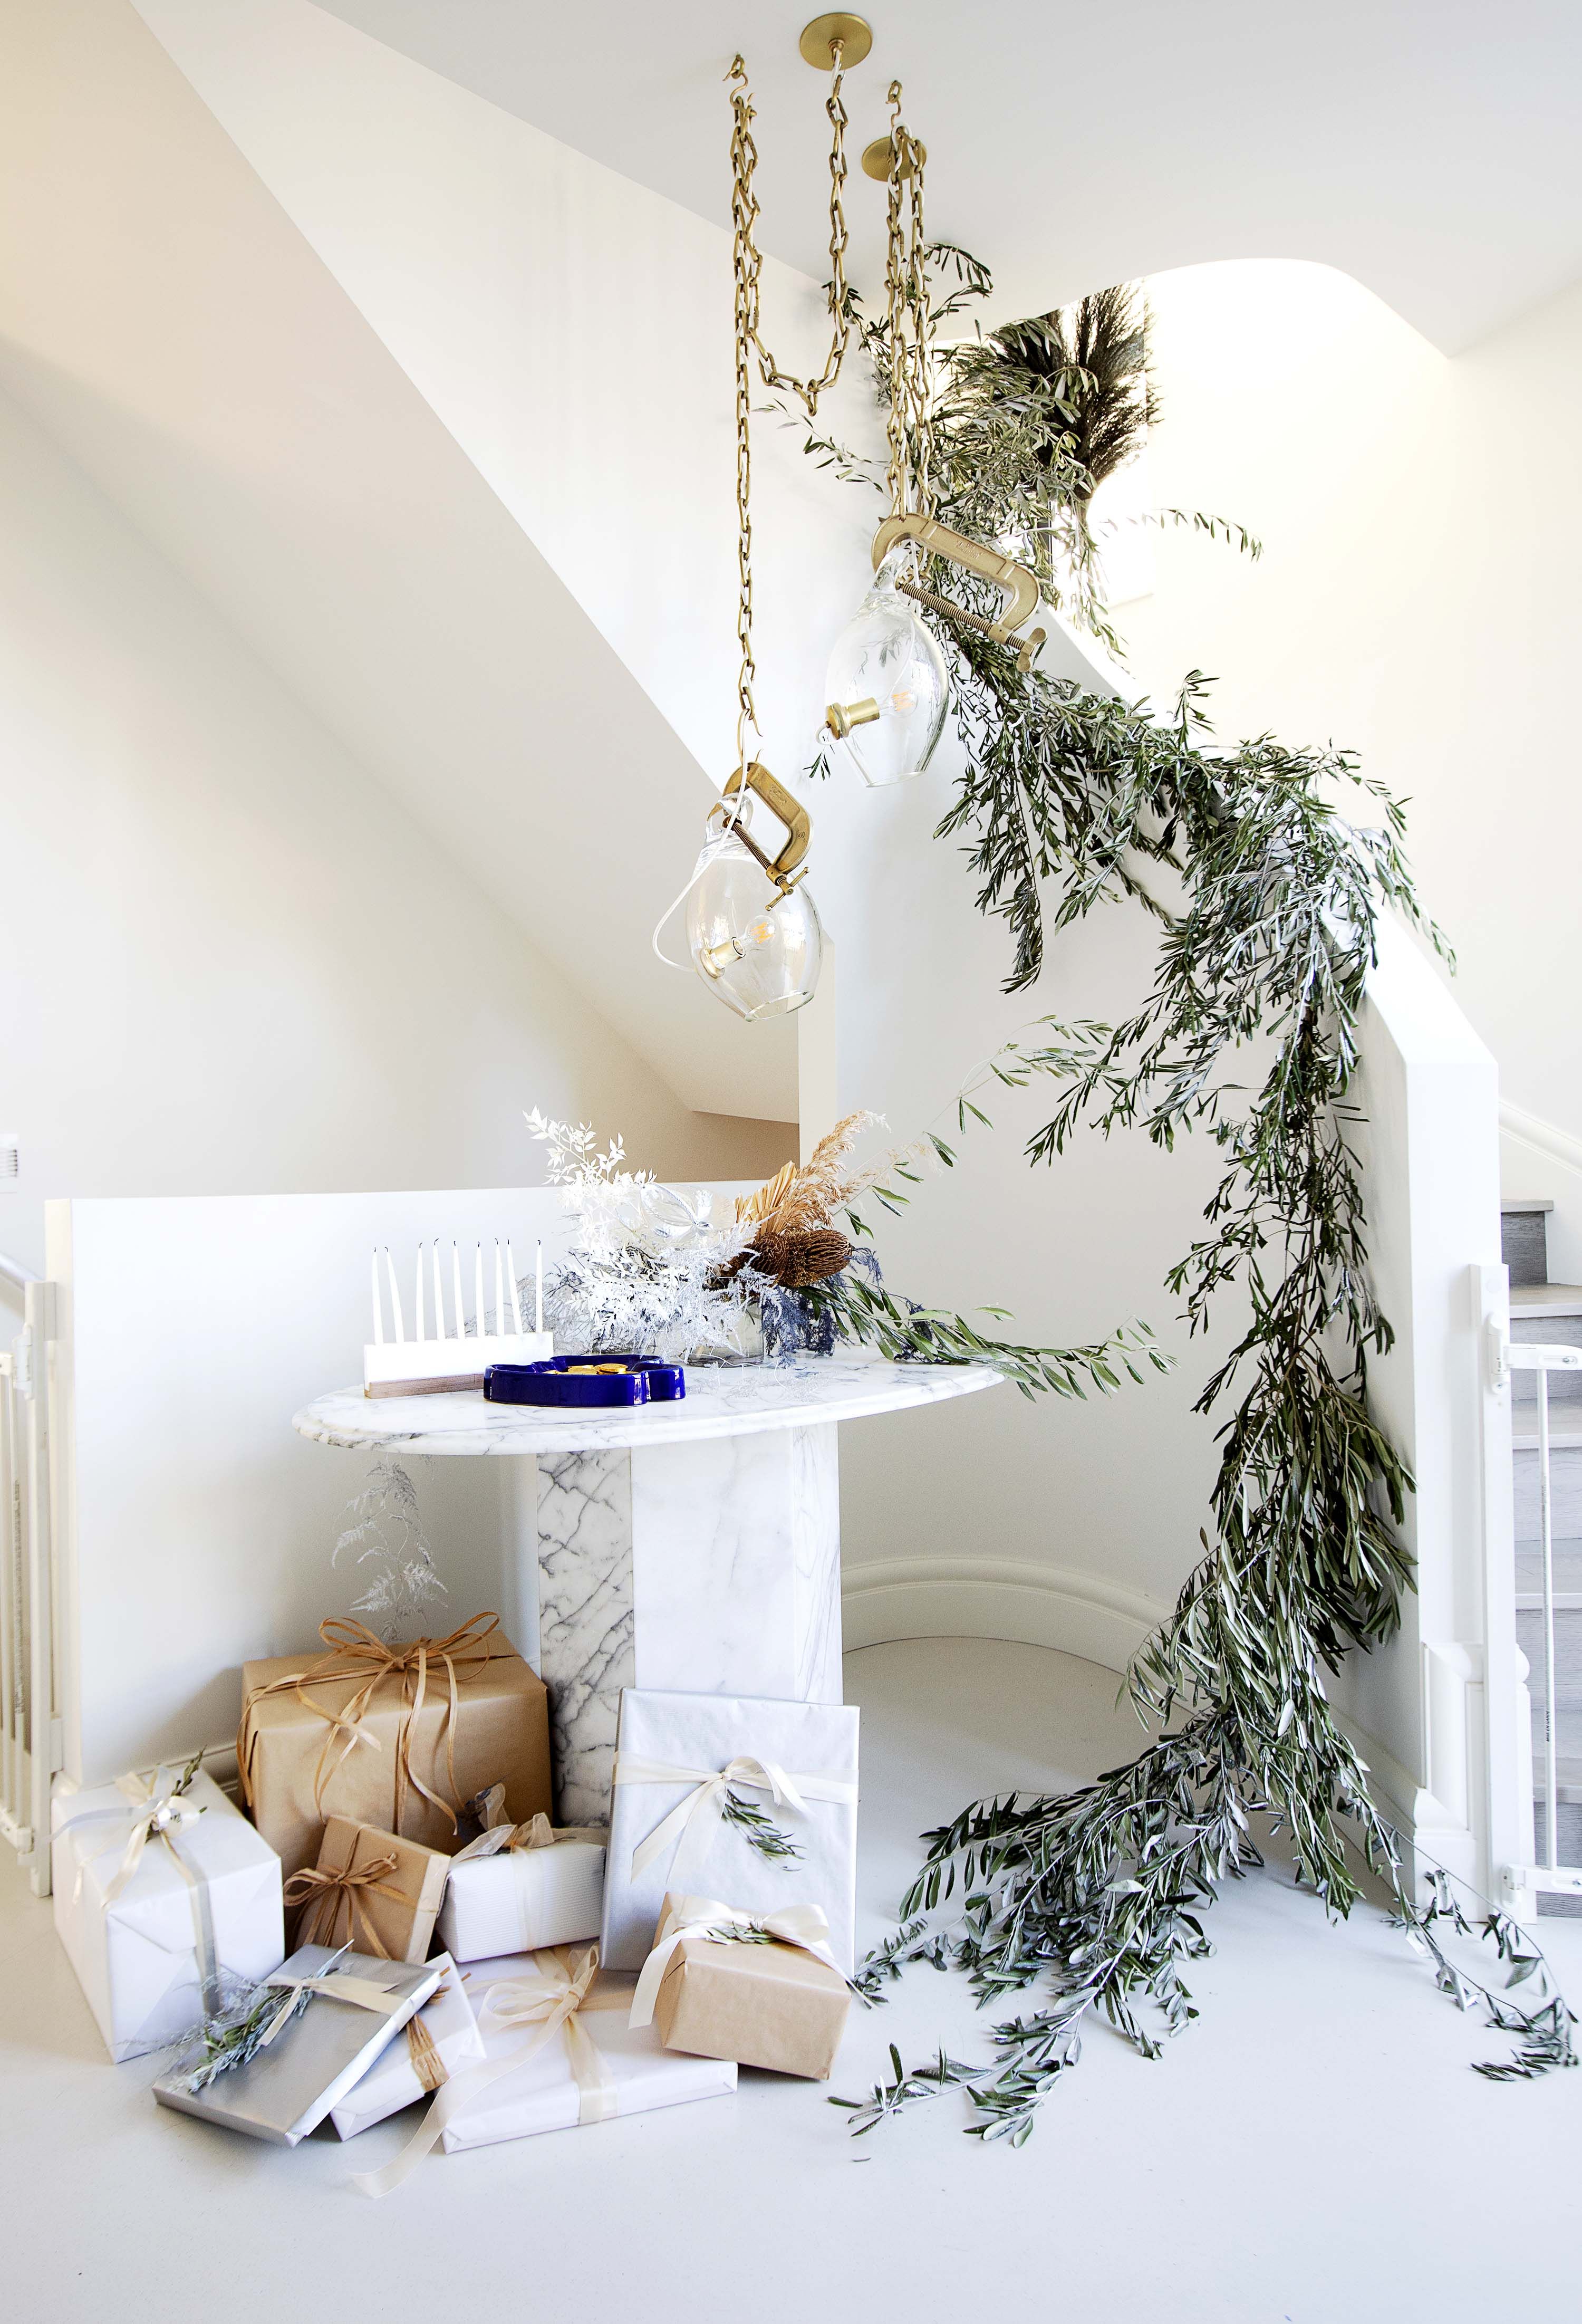 How to Decorate for Christmas Expert Ideas from Interior Designers 